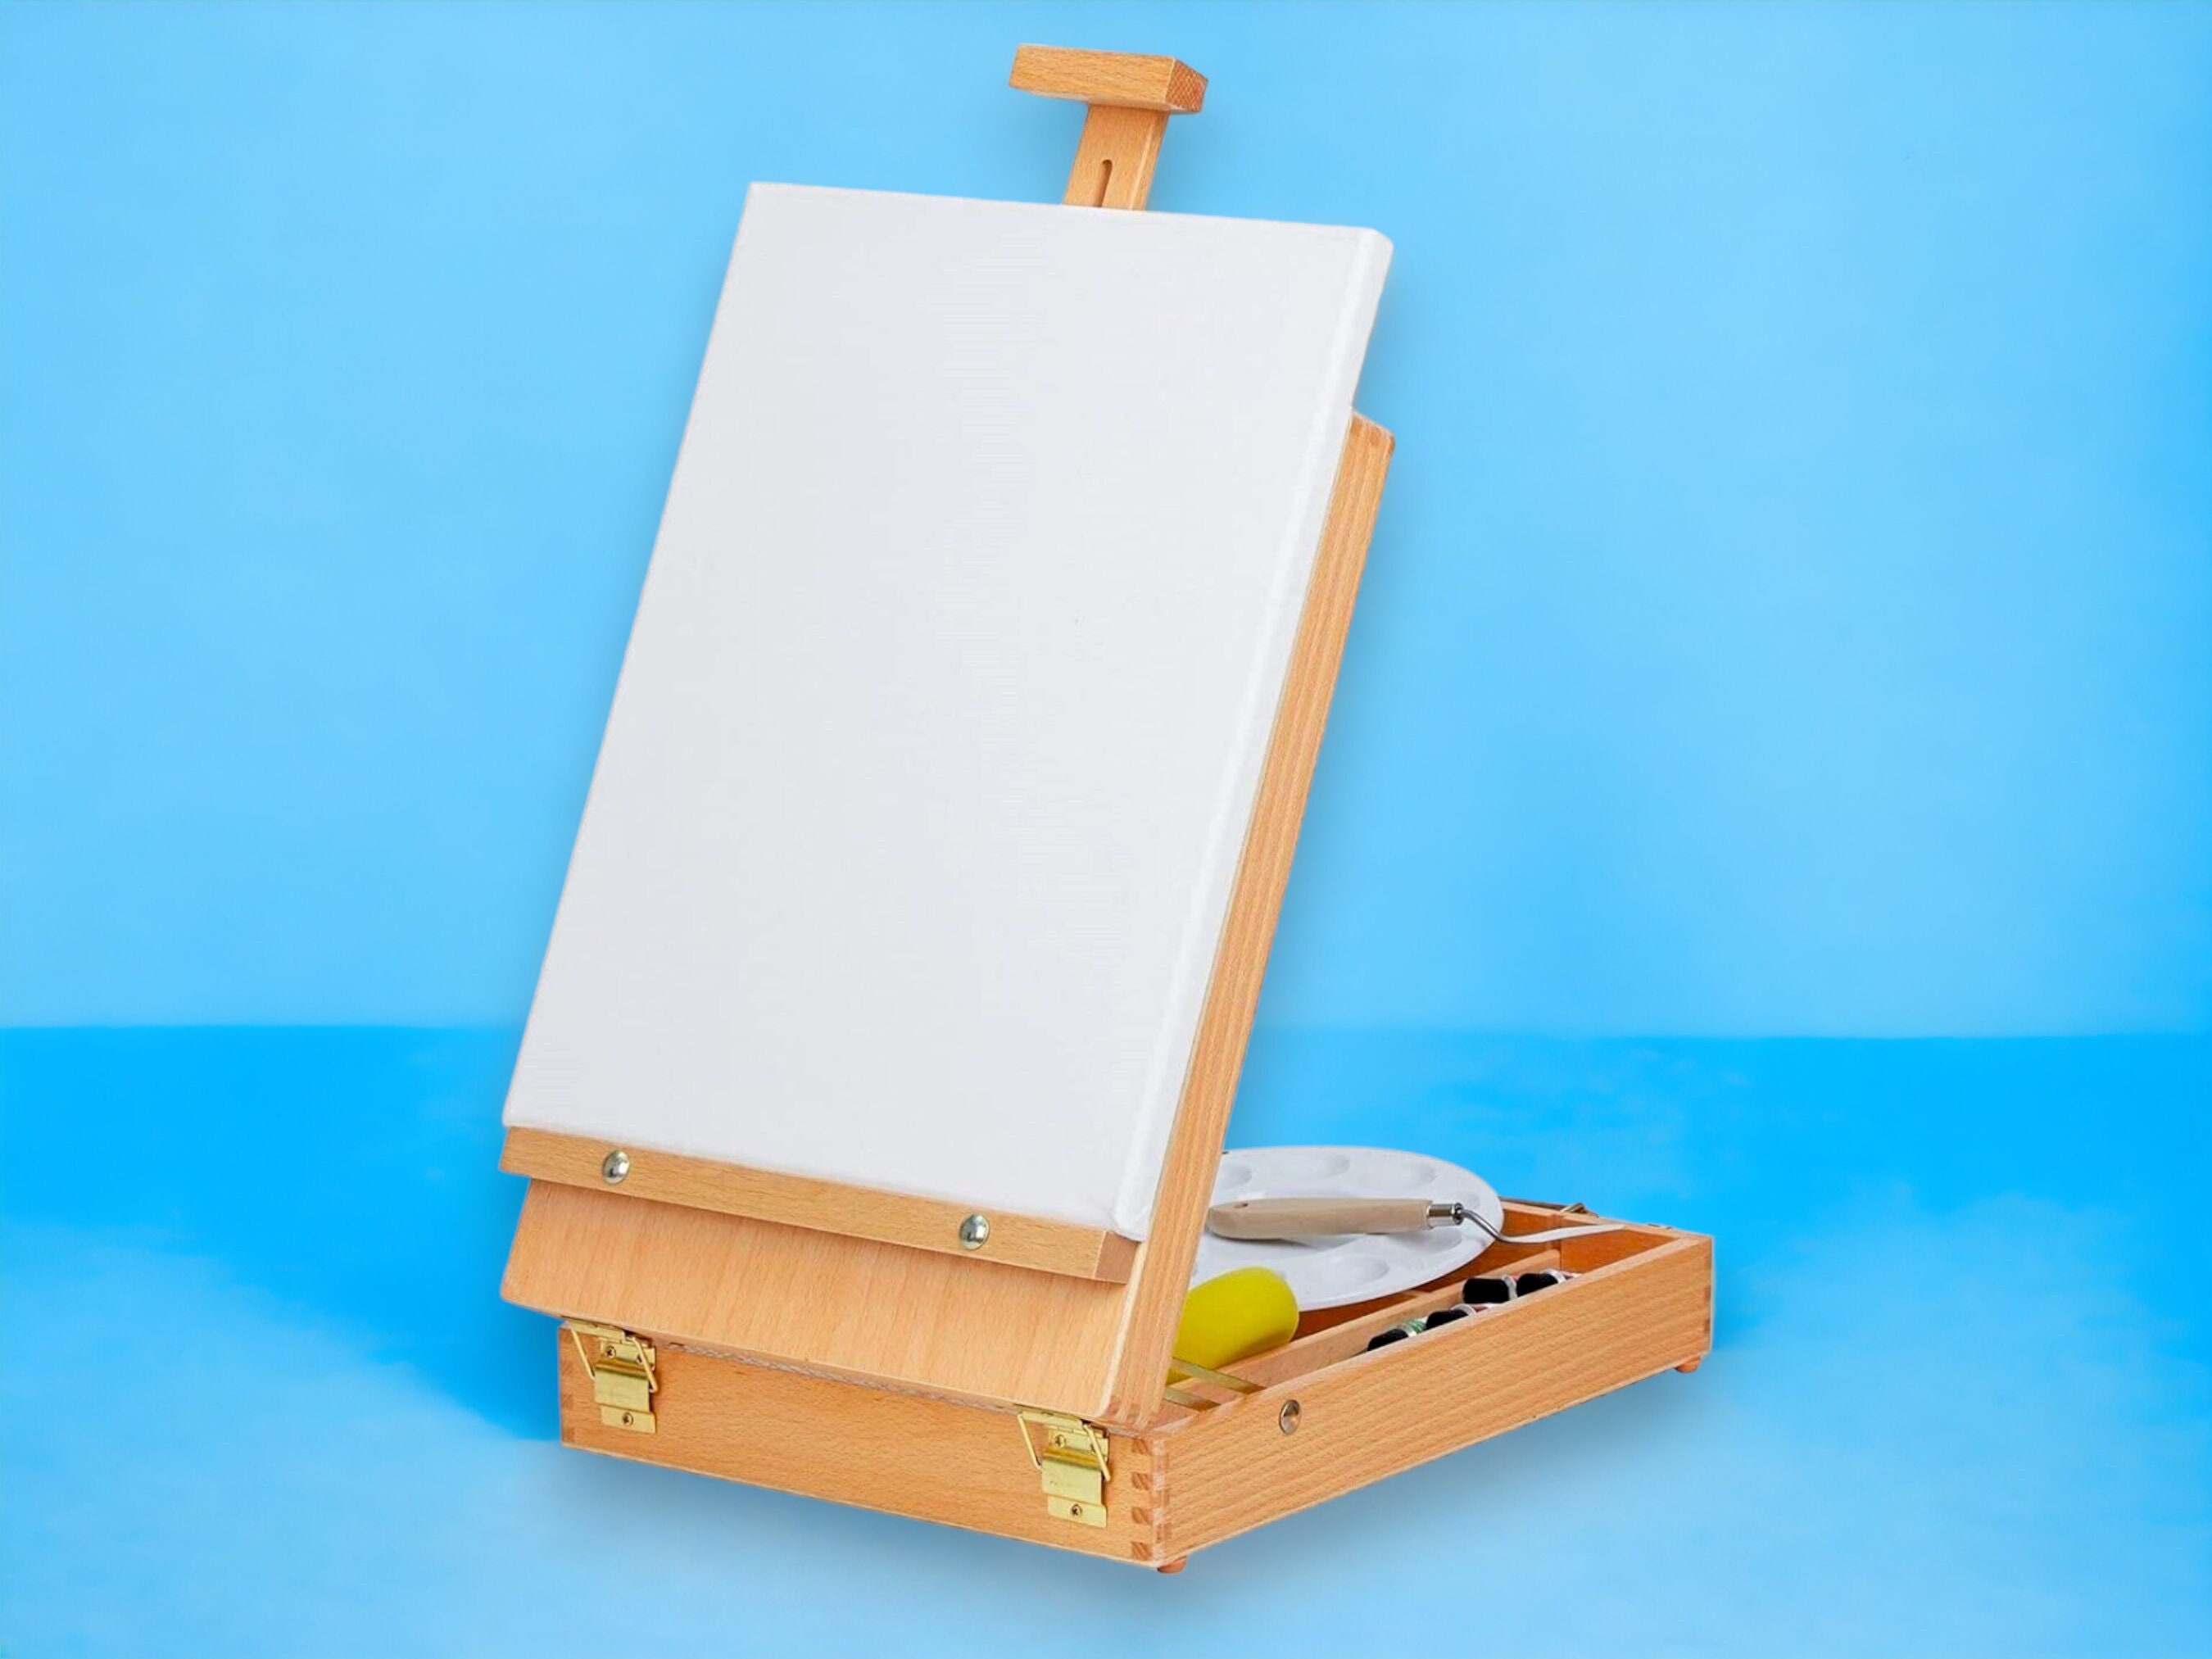 a Frame Mini Canvas Holder Easel - China Lidl, Drawing Set